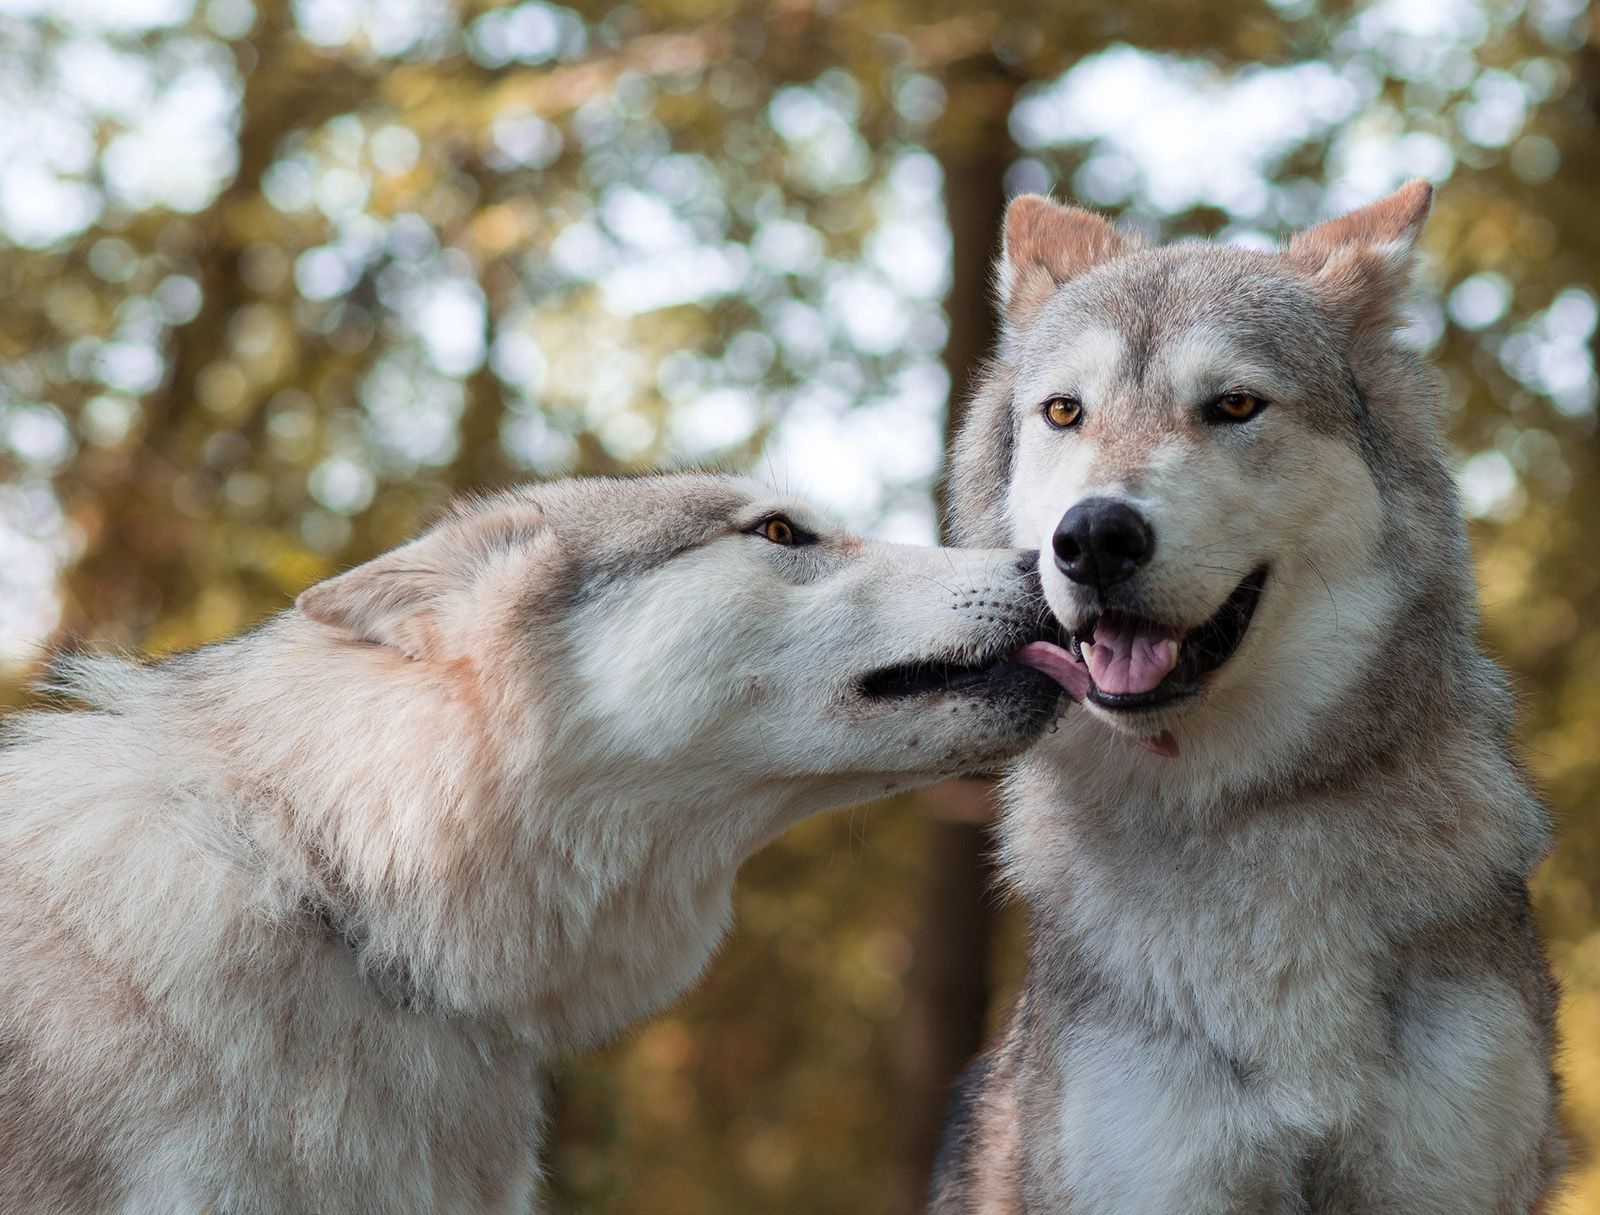 Animal affection: Animals that kiss and other ways they show affection –  Chicago Tribune